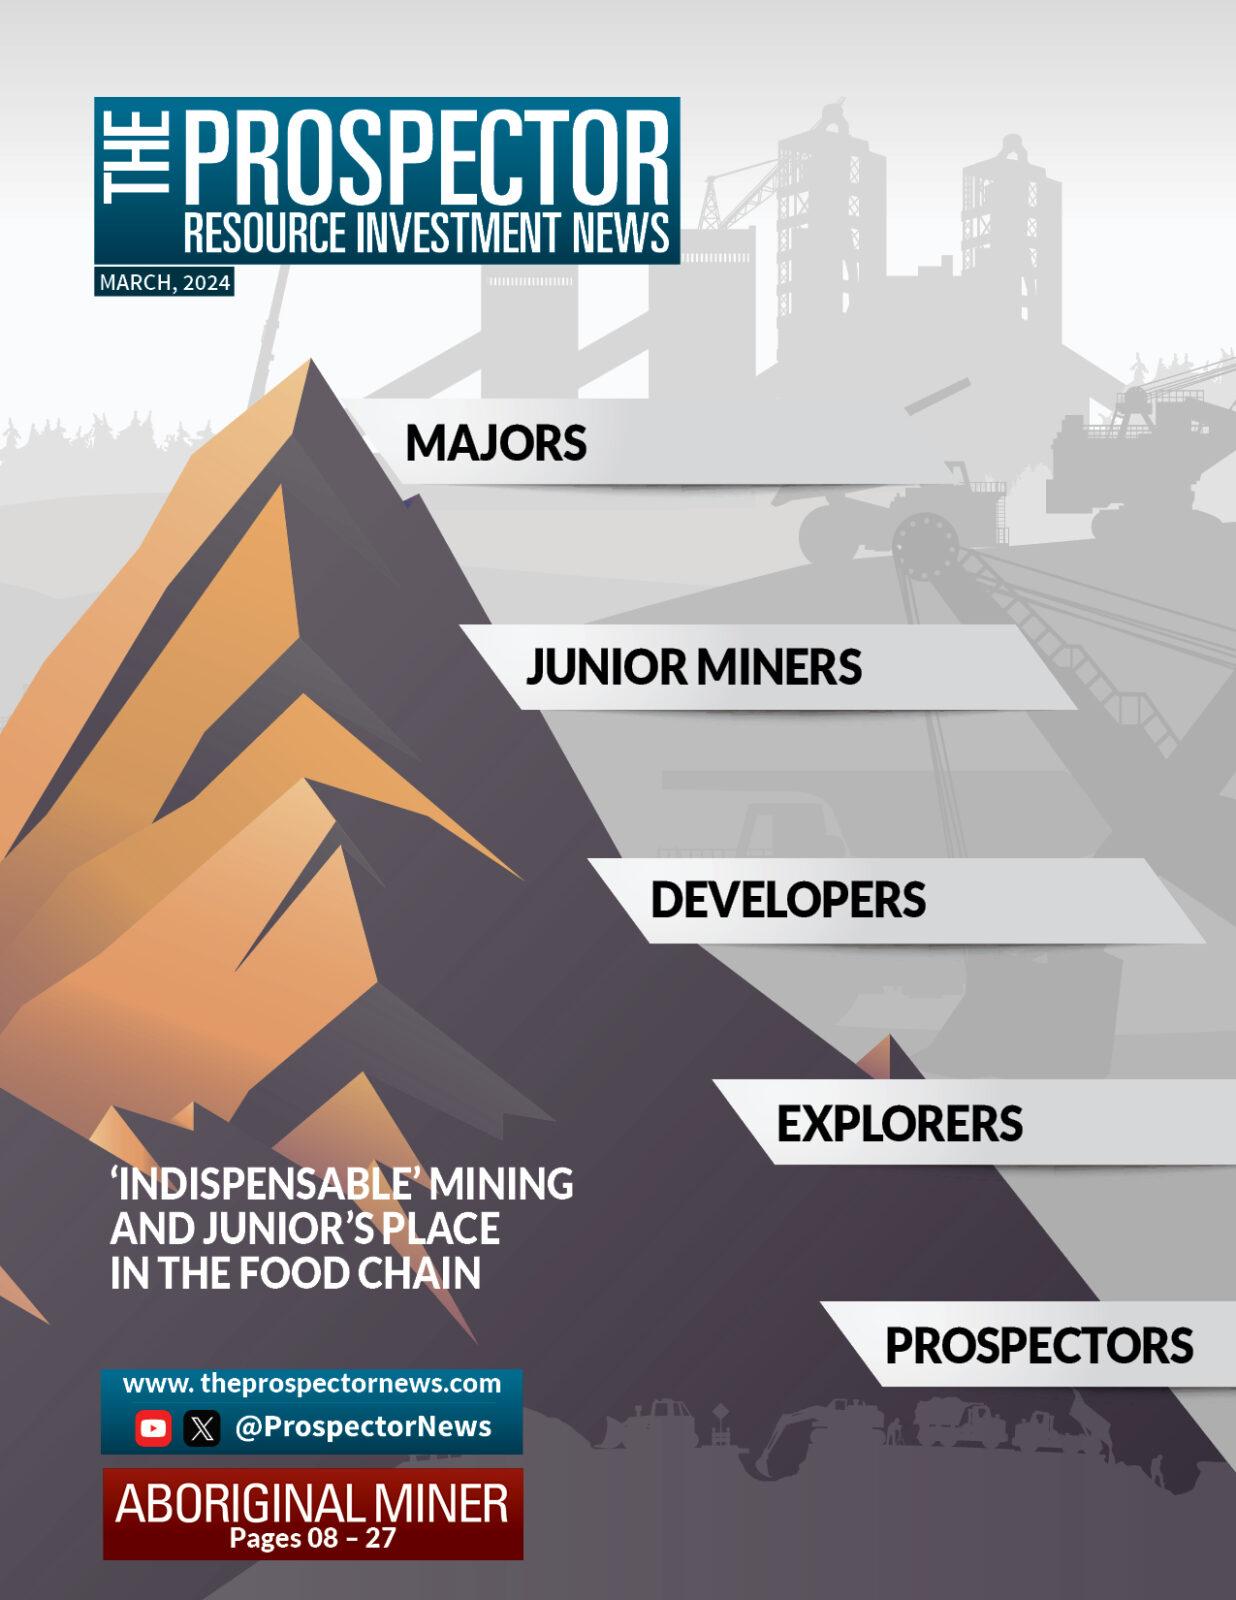 Download the Latest Prospector News